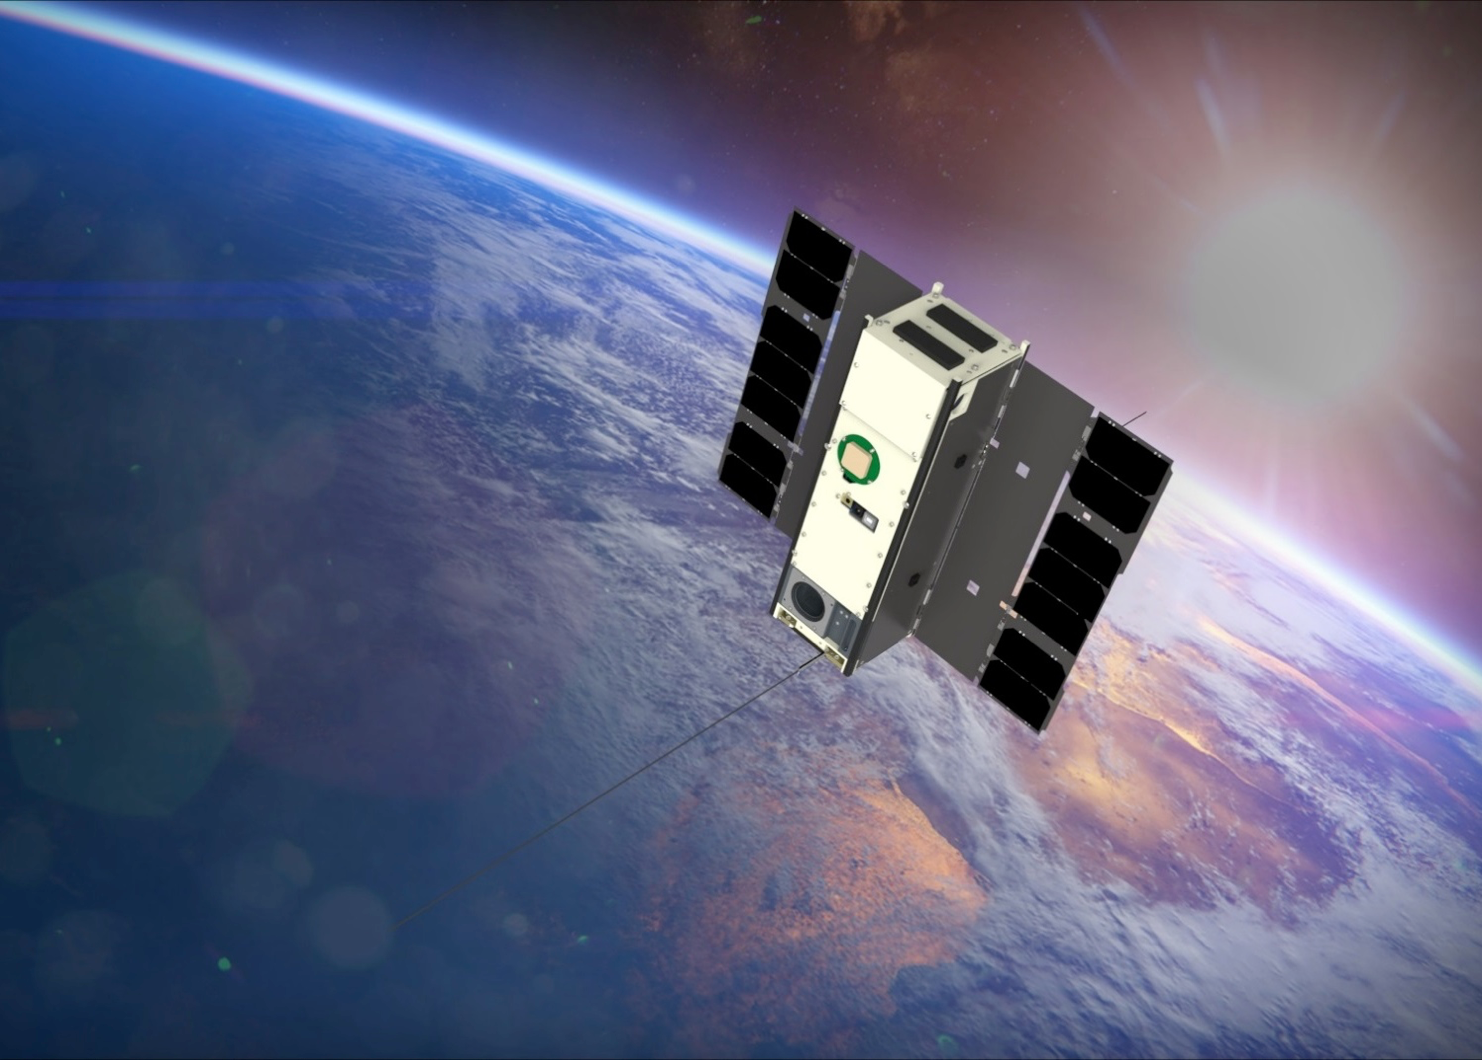 Illustration of the IceCube smallsat in small, with a view of Earth behind it.